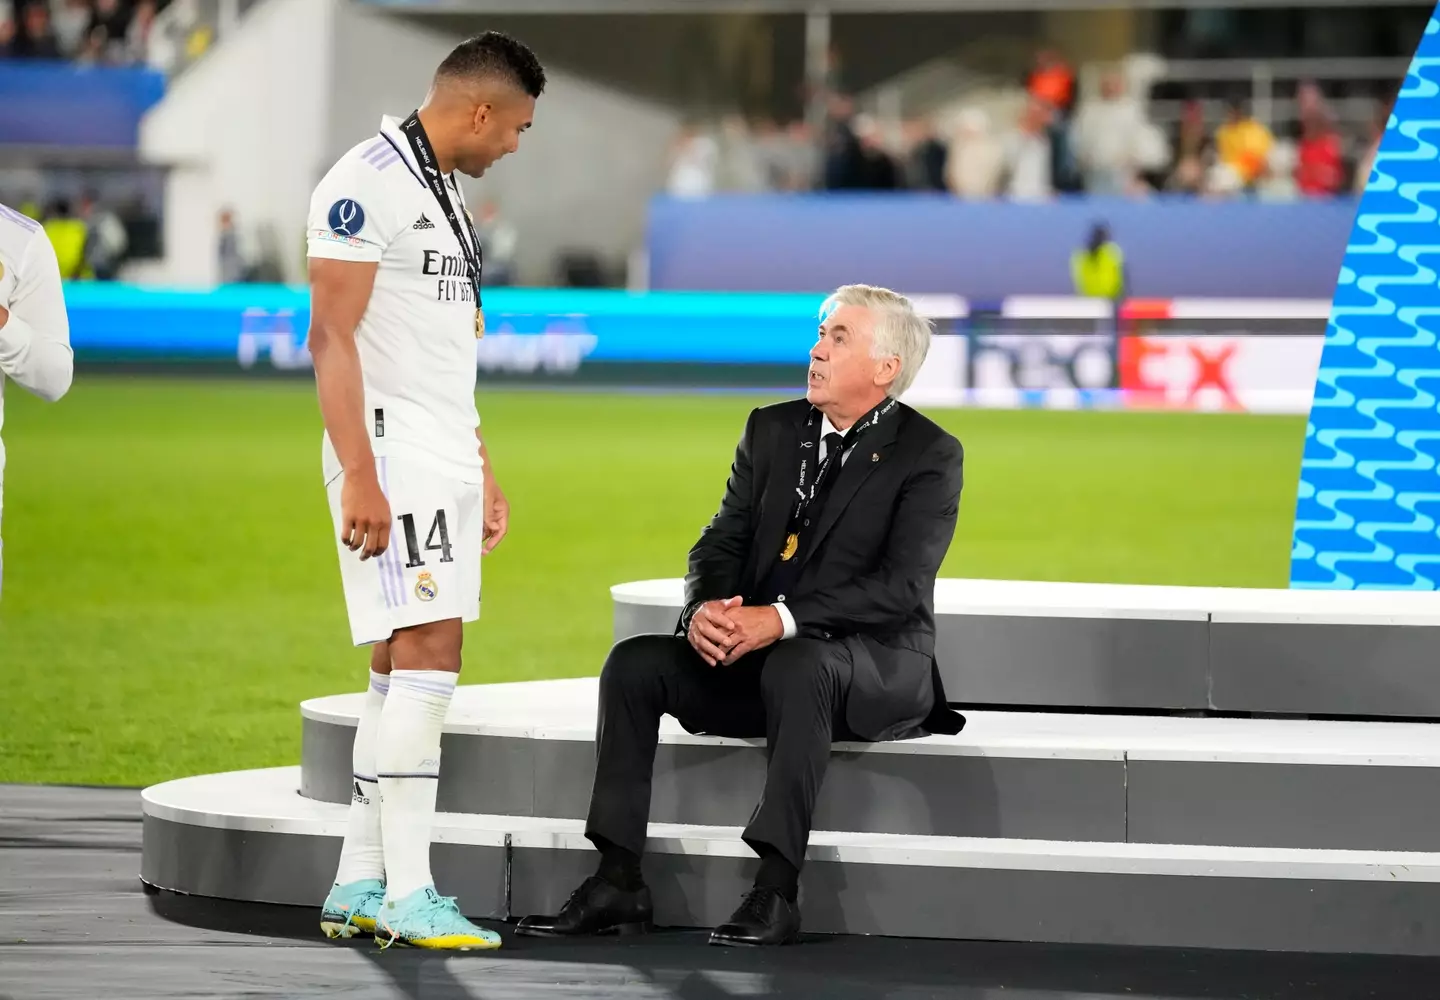 Casemiro and Ancelotti in conversation following Real's UEFA Super Cup win over Eintracht Frankfurt. (Image